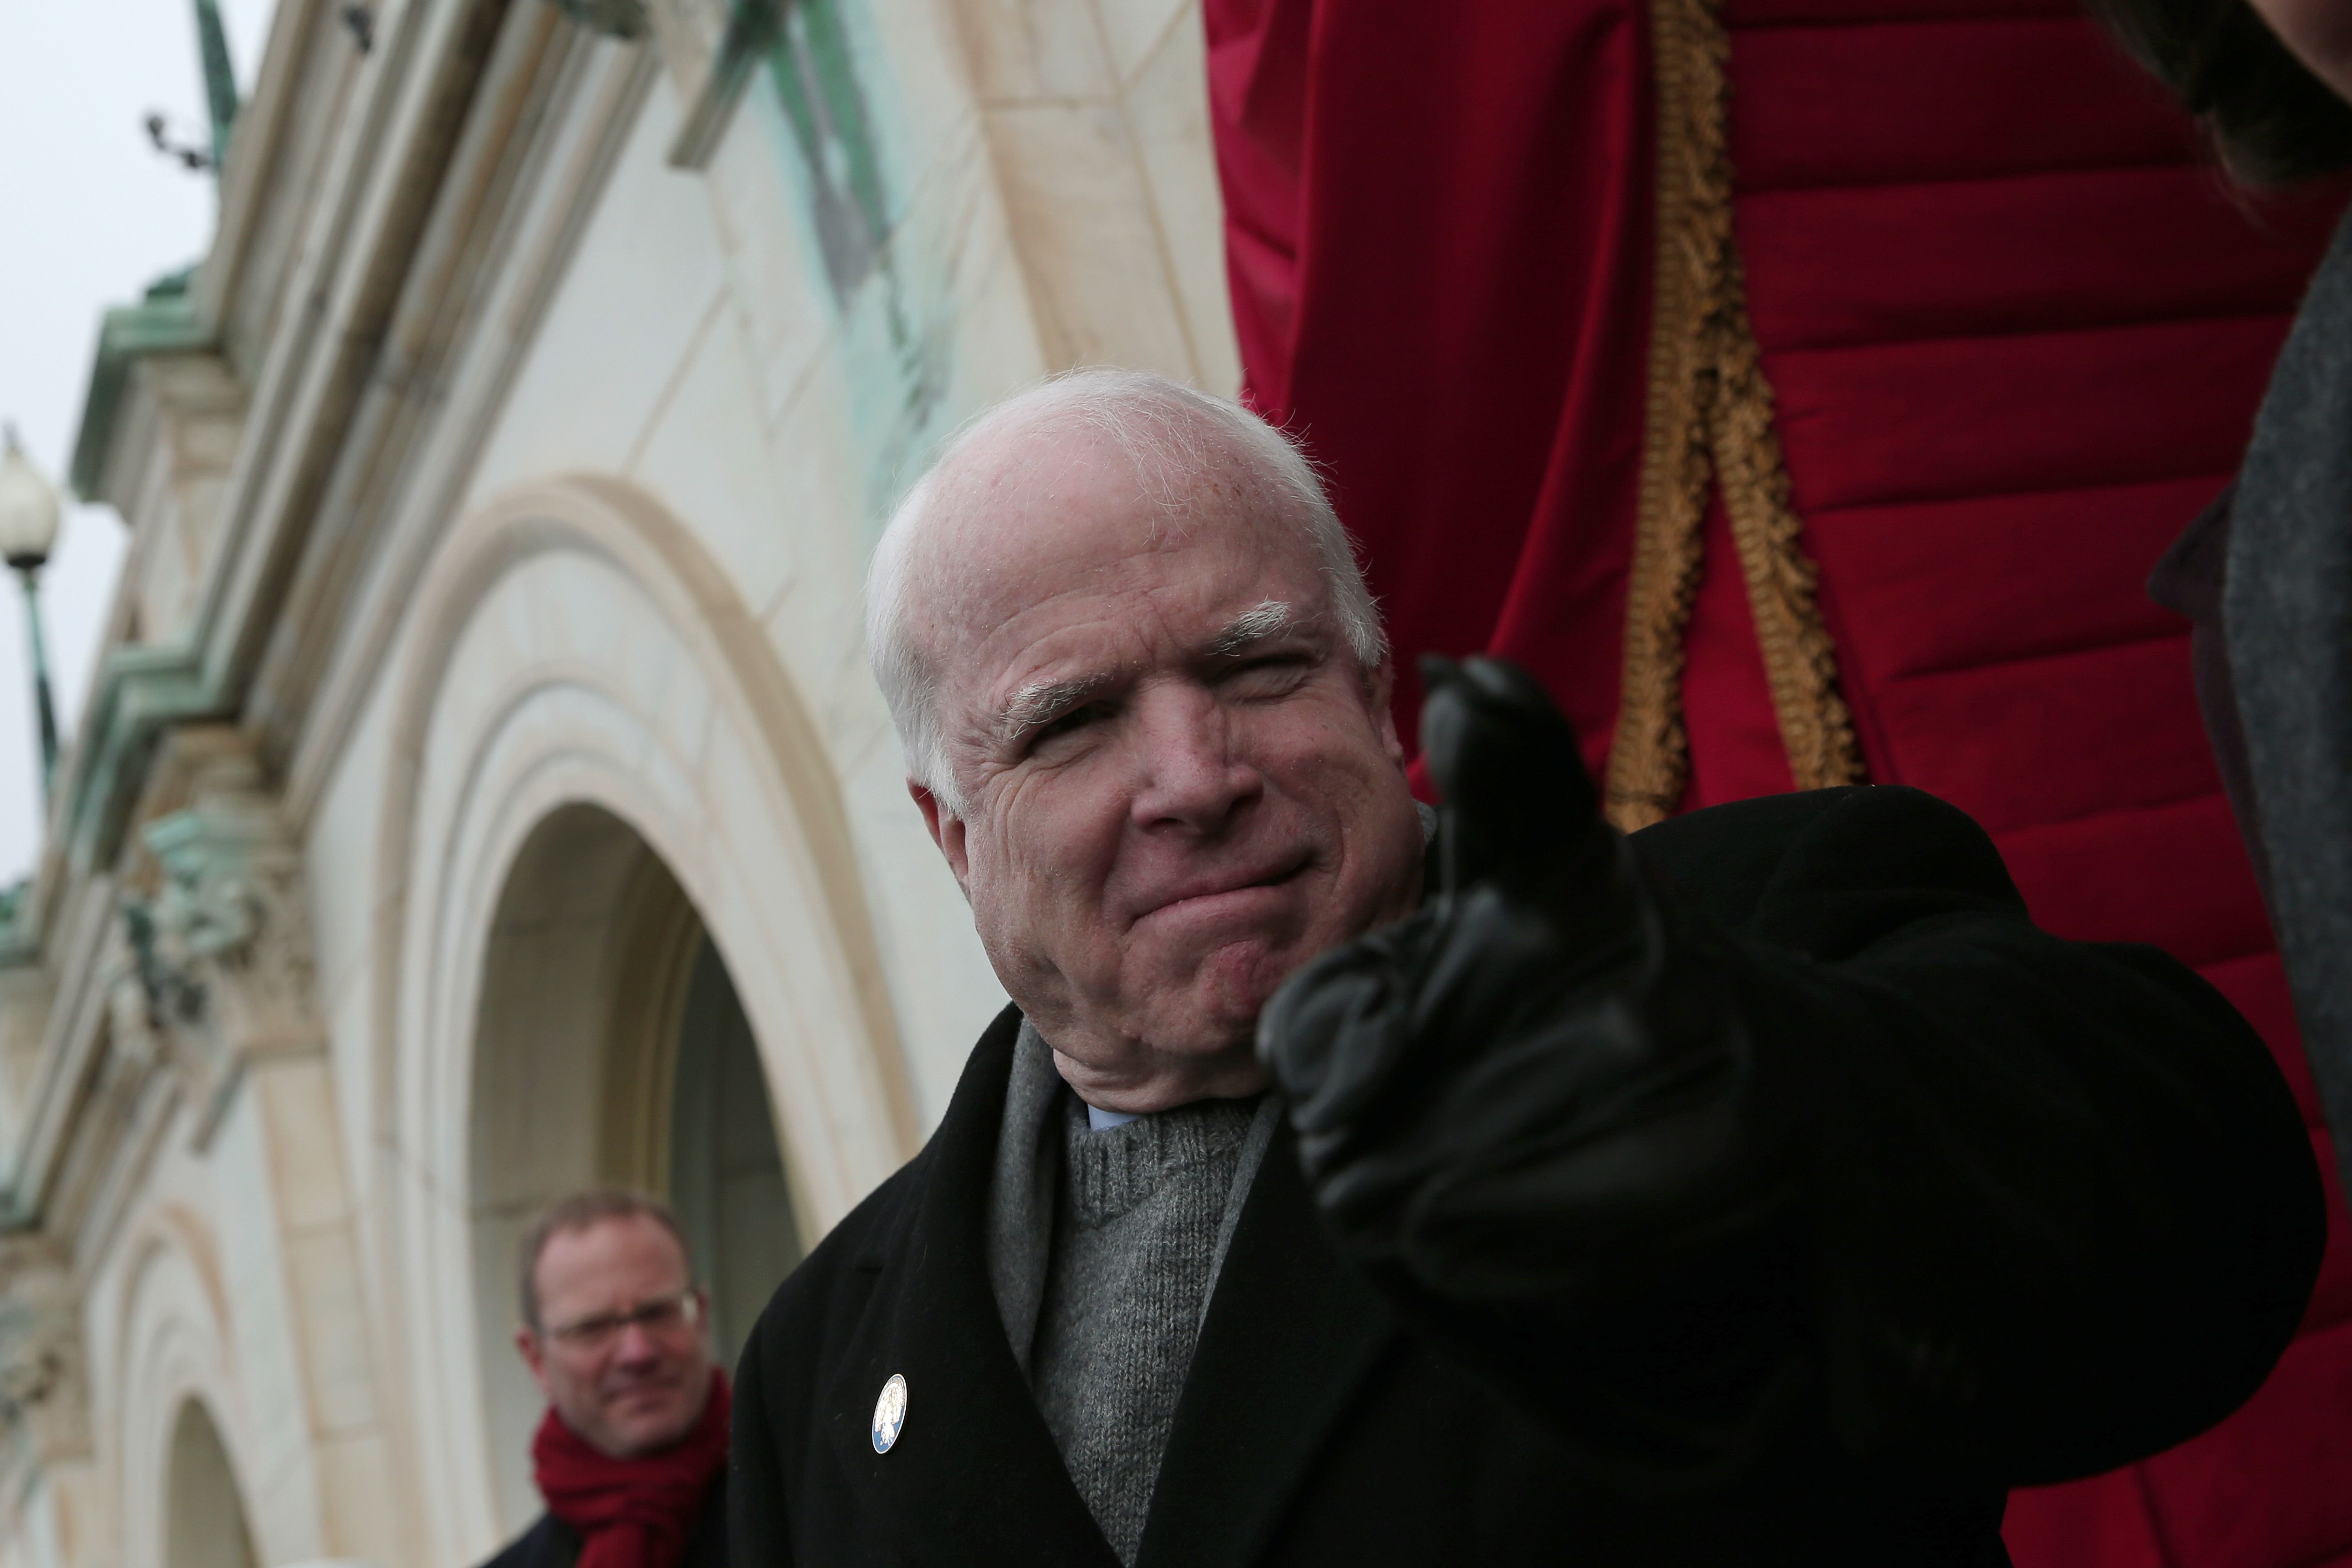 WASHINGTON, DC - JANUARY 21: U.S. Senator John McCain (R-AZ) gestures to U.S. Rep. Peter King before the presidential inauguration on the West Front of the U.S. Capitol January 21, 2013 in Washington, DC. Barack Obama was re-elected for a second term as President of the United States. (Photo by Win McNamee/Getty Images)